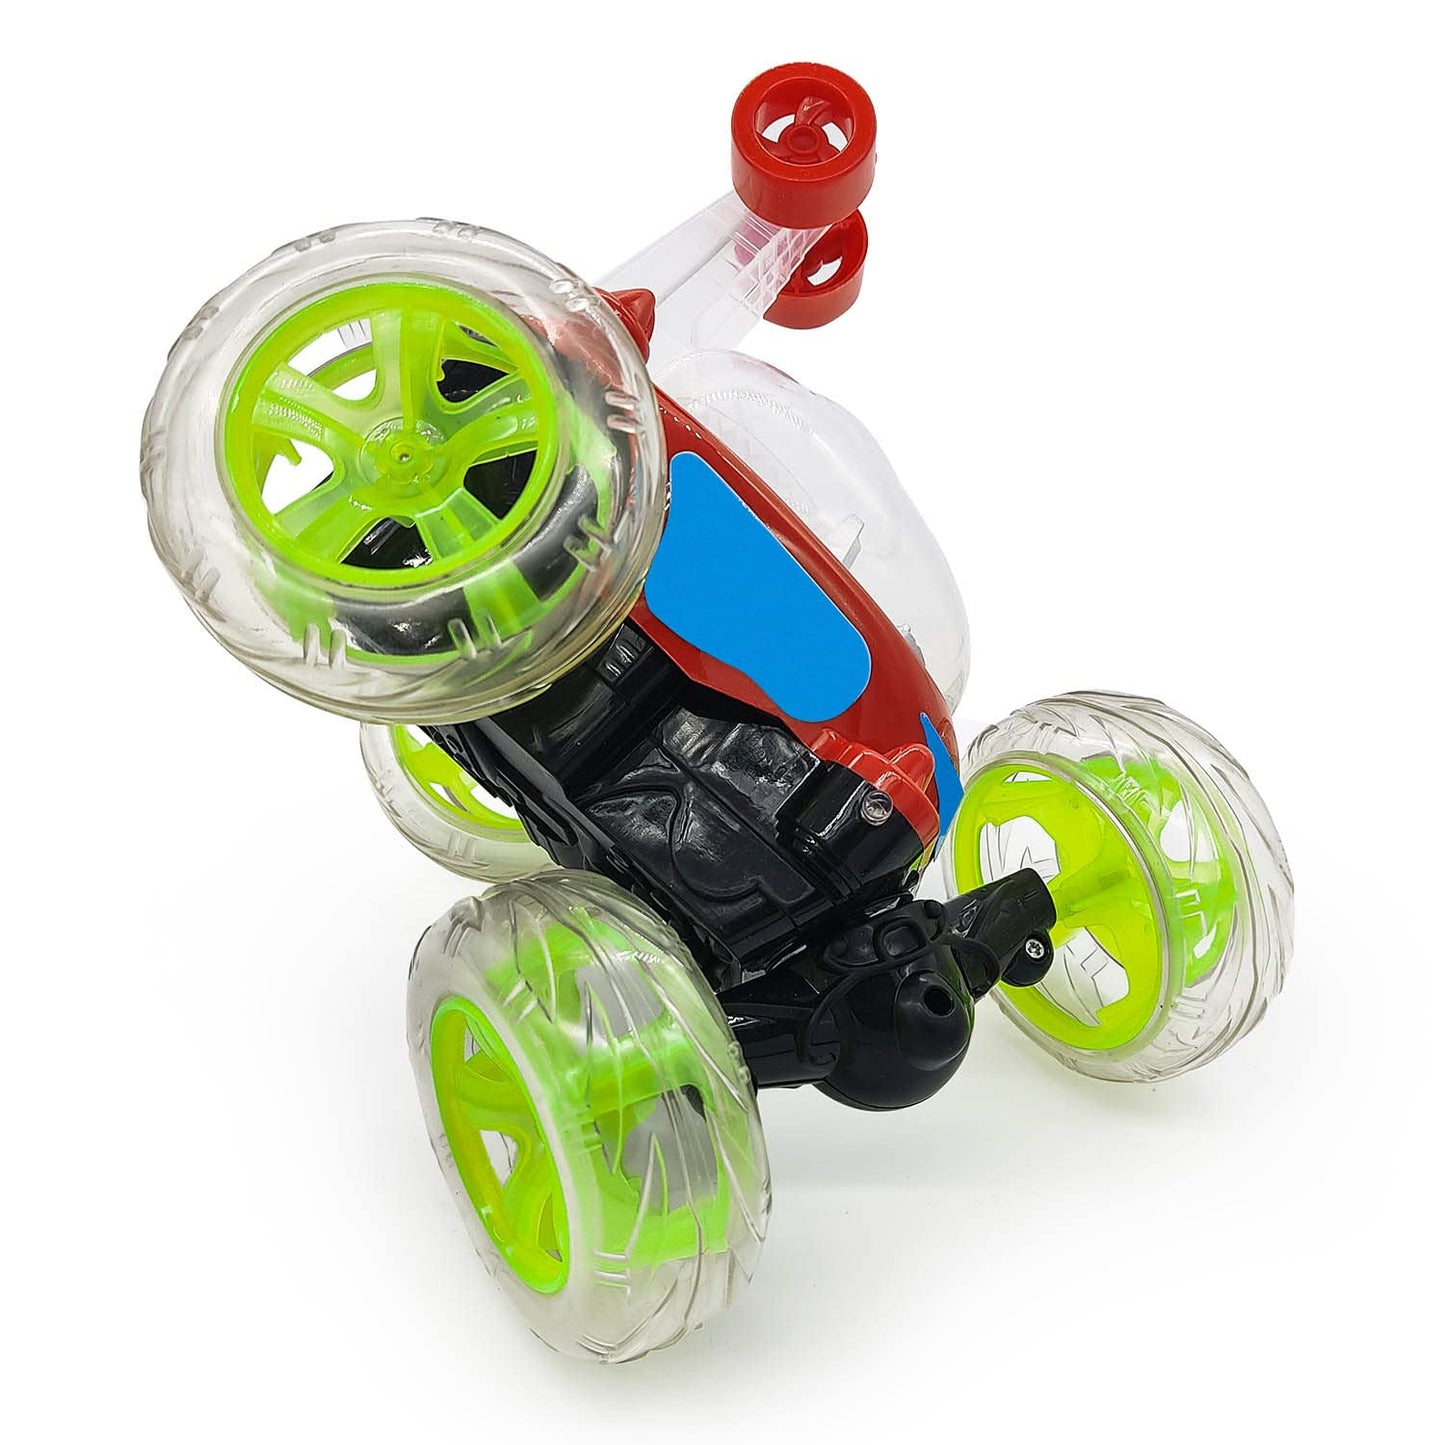 360 Degree Rolling Stunt Car for Kids | Remote Control, Plastic Body | Android Charger & 800 MAH Battery | 3 Hrs Running Time, (Multicolour)